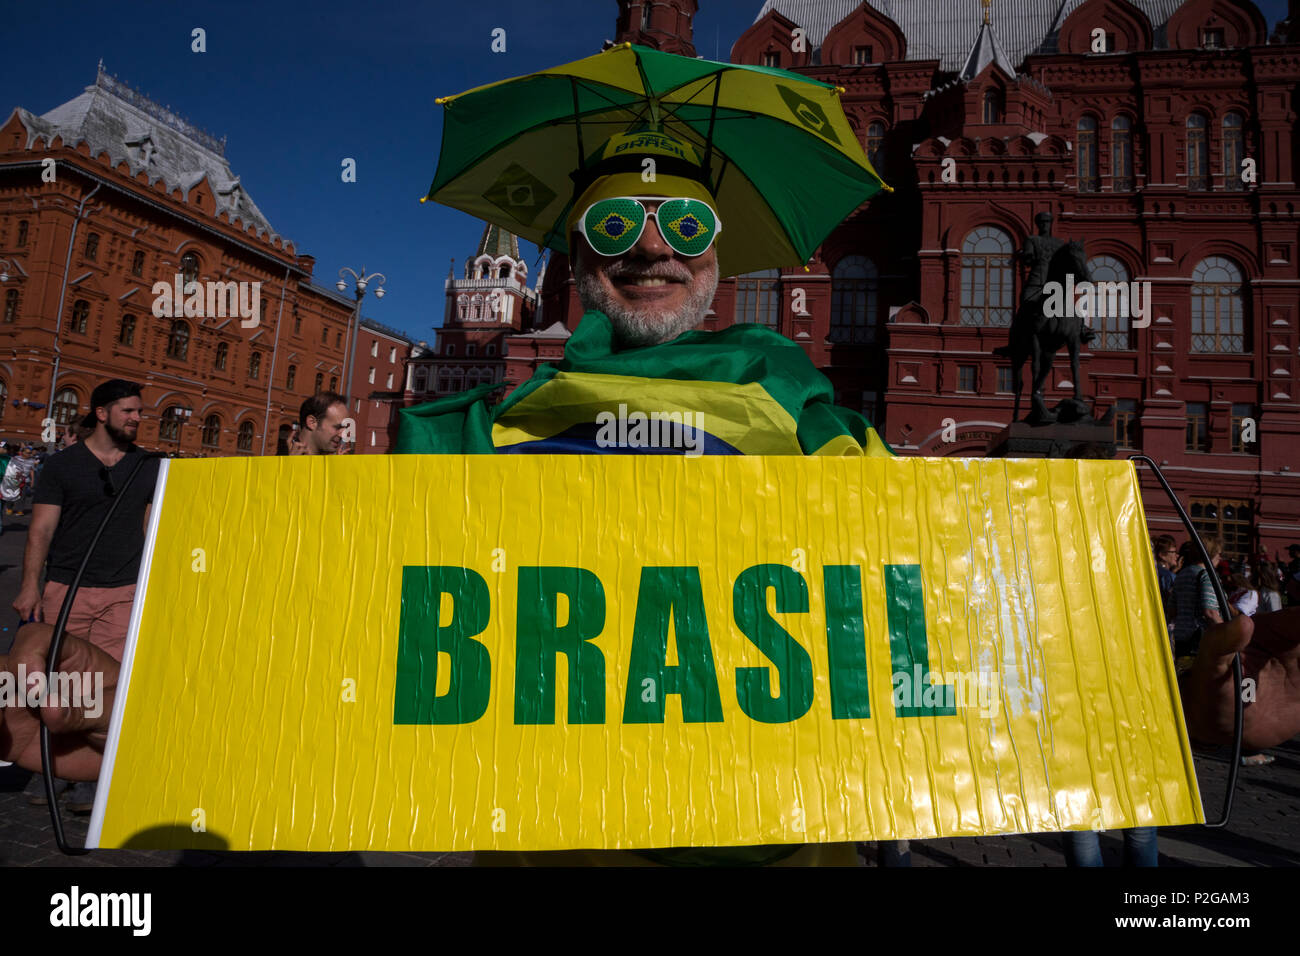 Moscow, Russia. 15th June, 2018. Brasilian fans walking around of the Moscow's center during the 2018 FIFA World Cup Russia Credit: Nikolay Vinokurov/Alamy Live News Stock Photo